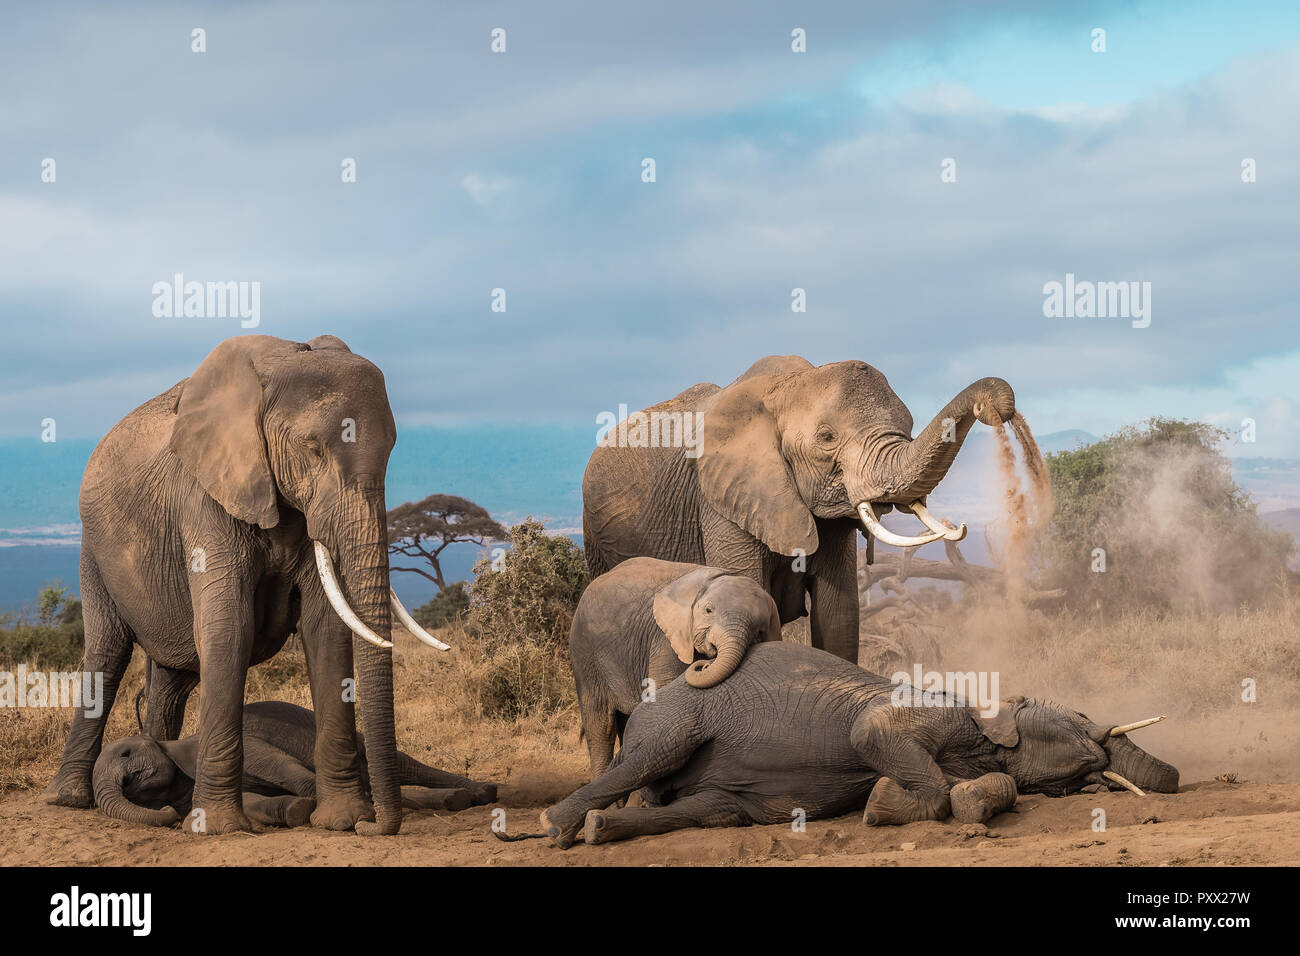 This image of Elephant's family is taken at Amboseli in Kenya. Stock Photo